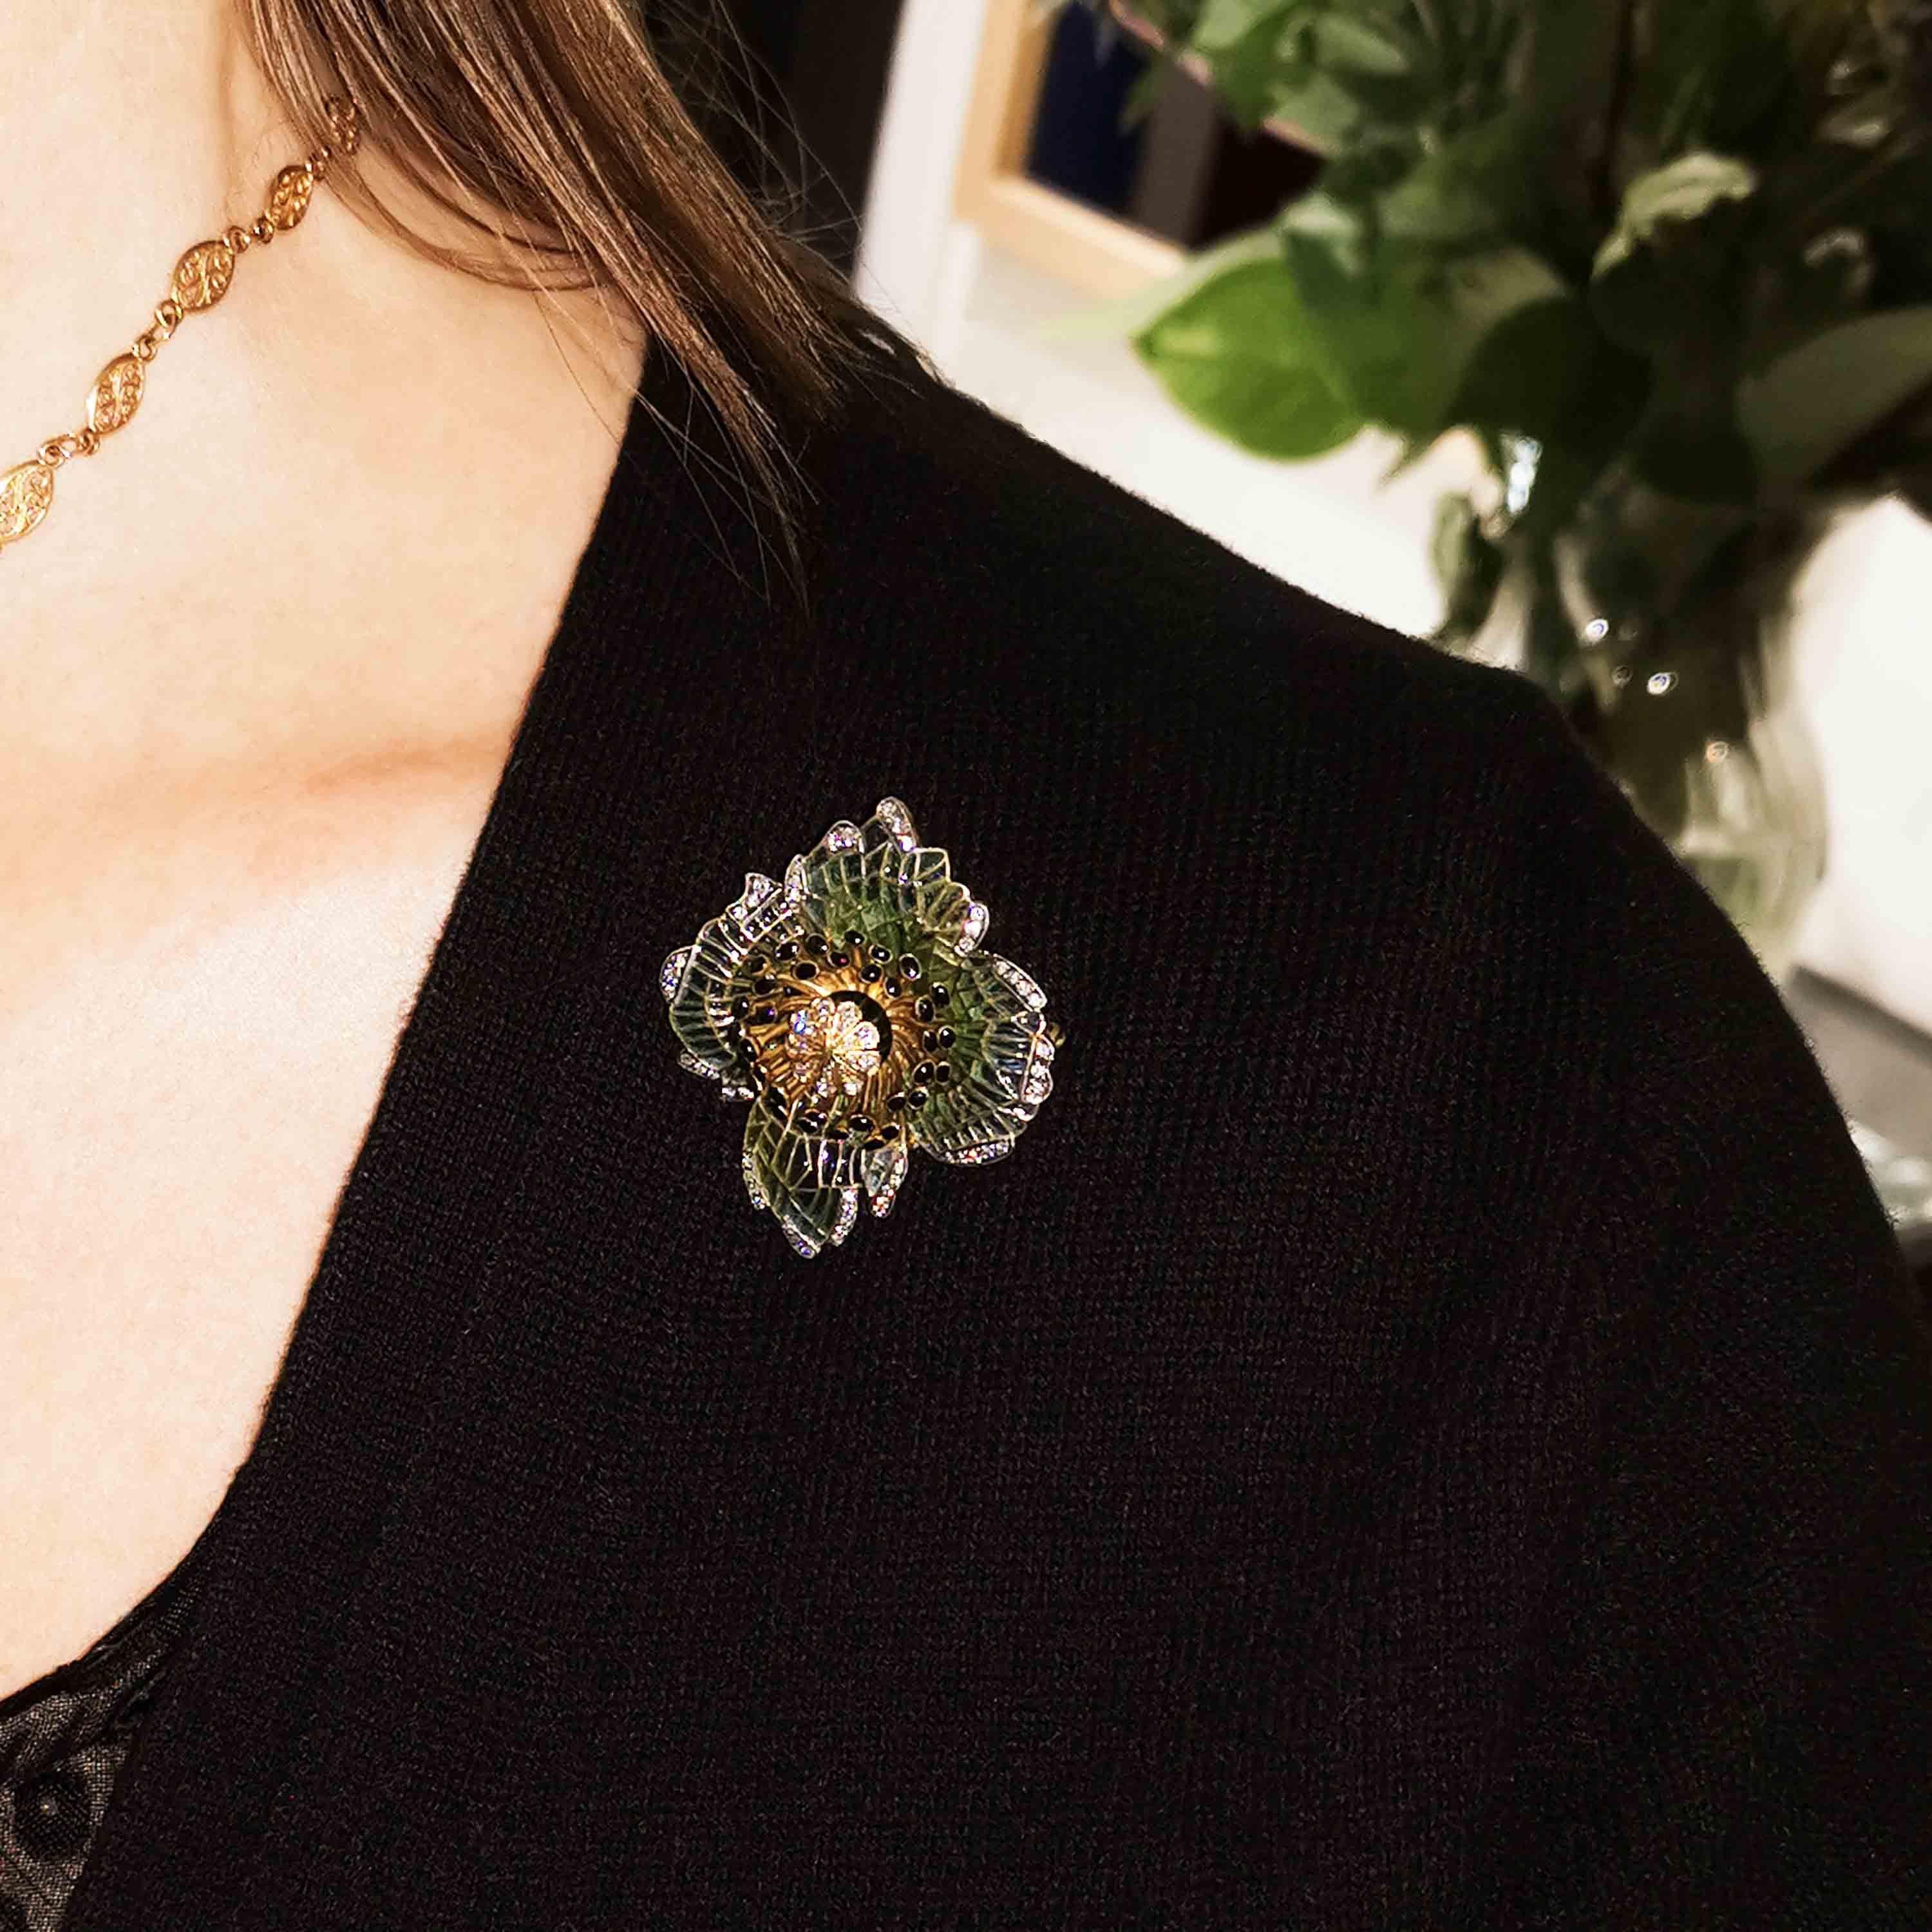 Moira Poppy Plique À Jour Enamel, Diamond, Silver and Gold Brooch In Good Condition For Sale In London, GB